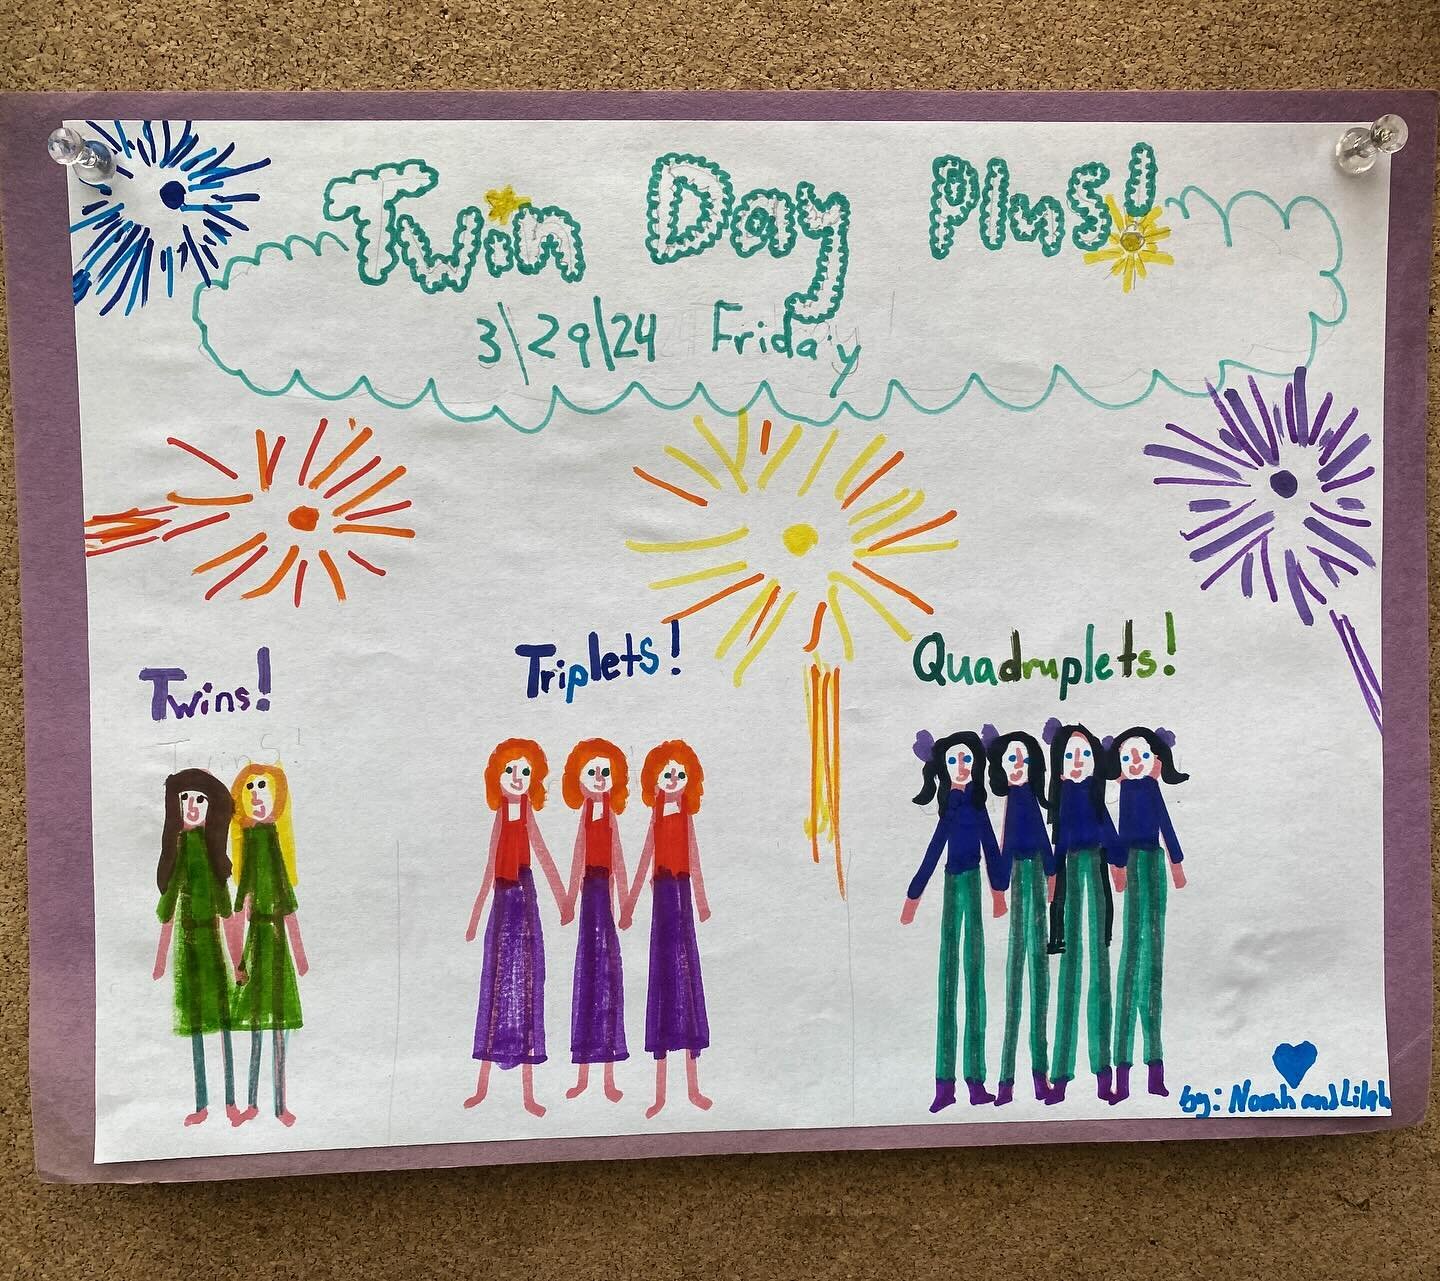 Another Spirit Day is coming up! Twin Day Plus is when you&rsquo;ll dress alike with a friend or two or three&hellip;.we&rsquo;re excited to see what the students pair up or group up with. #orchardschoolaptos #spiritday #twindayplus